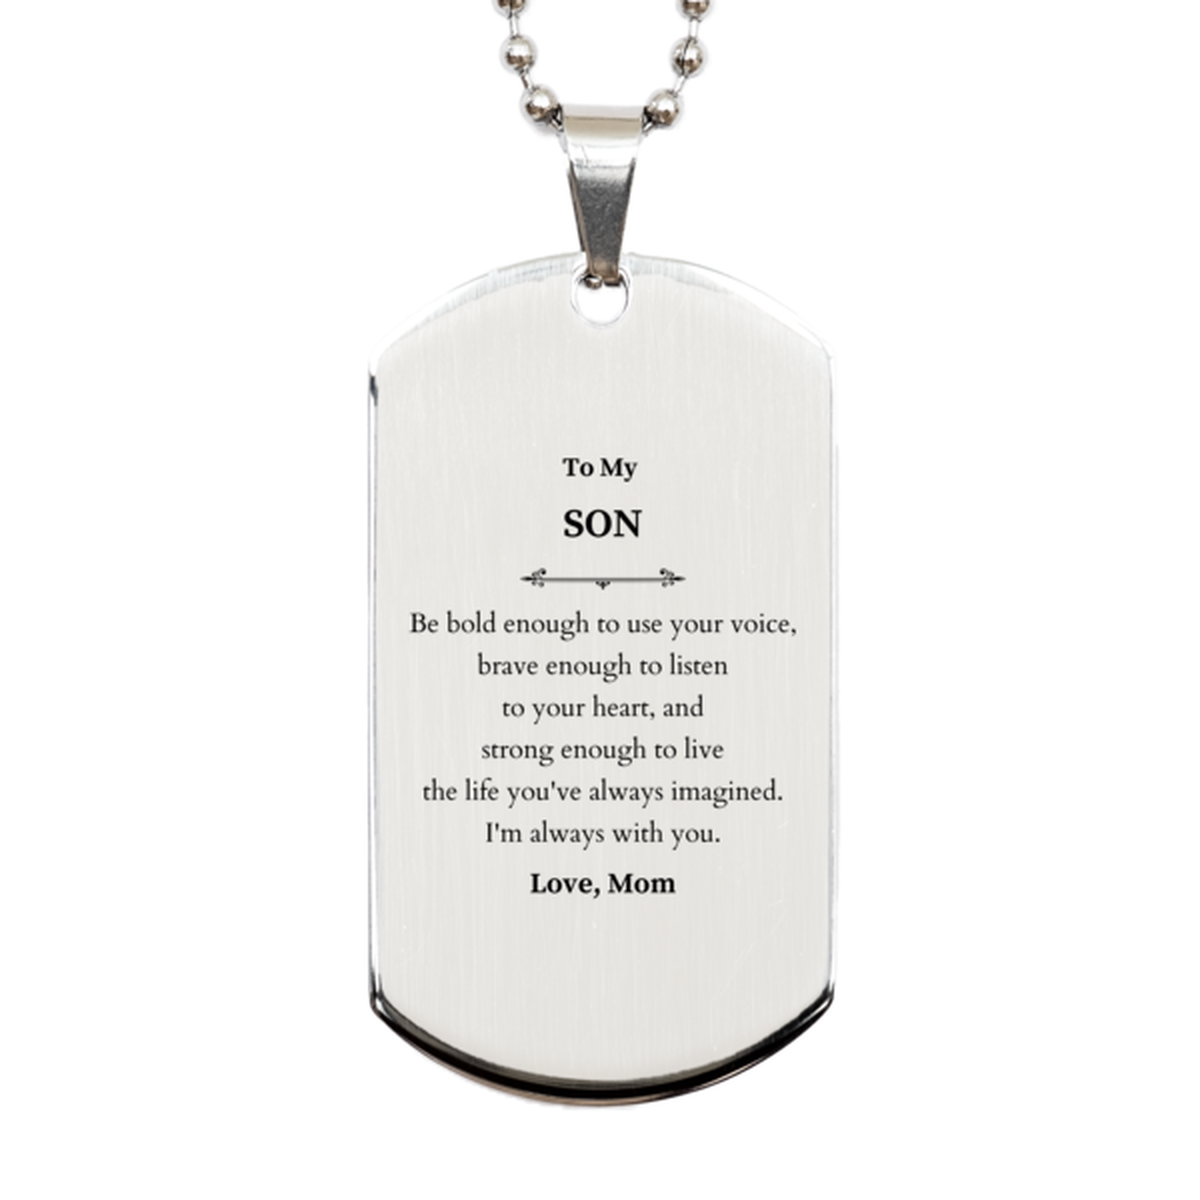 Keepsake Son Silver Dog Tag Gift Idea Graduation Christmas Birthday Son from Mom, Son Be bold enough to use your voice, brave enough to listen to your heart. Love, Mom